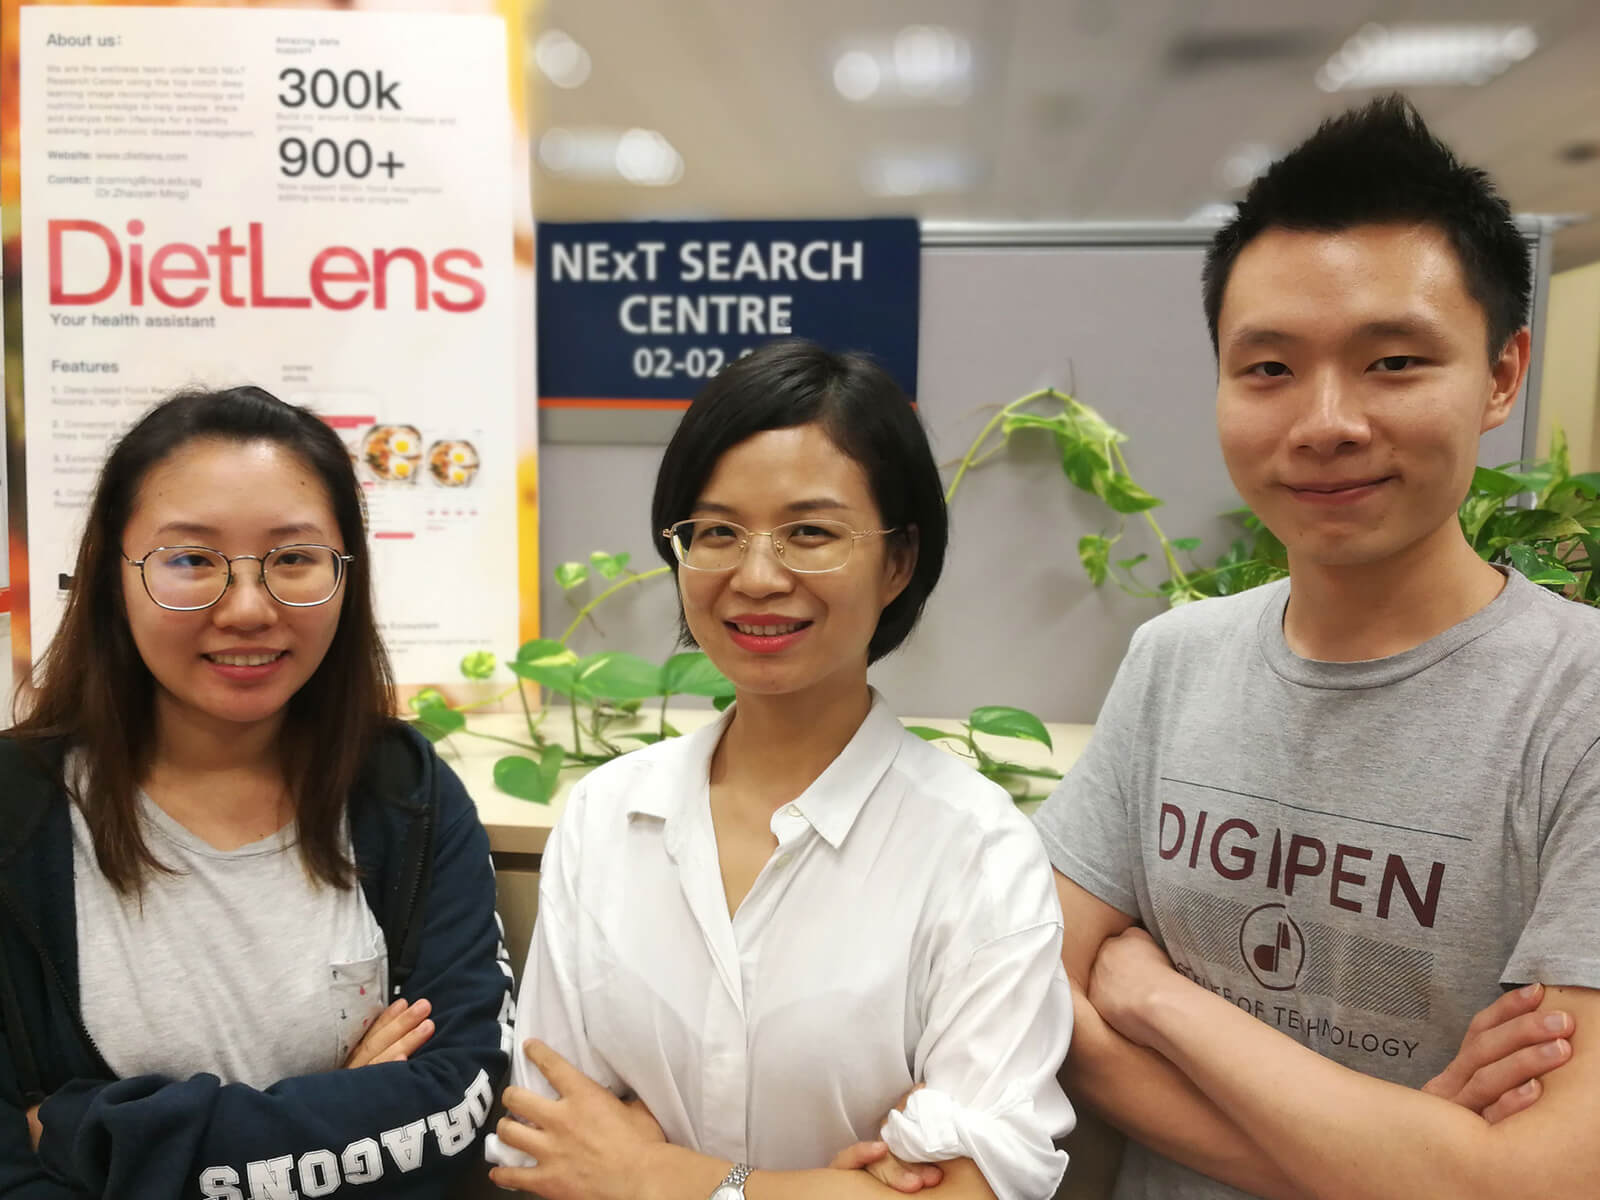 DigiPen (Singapore) alumni Irene Tan and Lim Sing Gee pose with a coworker in front of a DietLens banner.